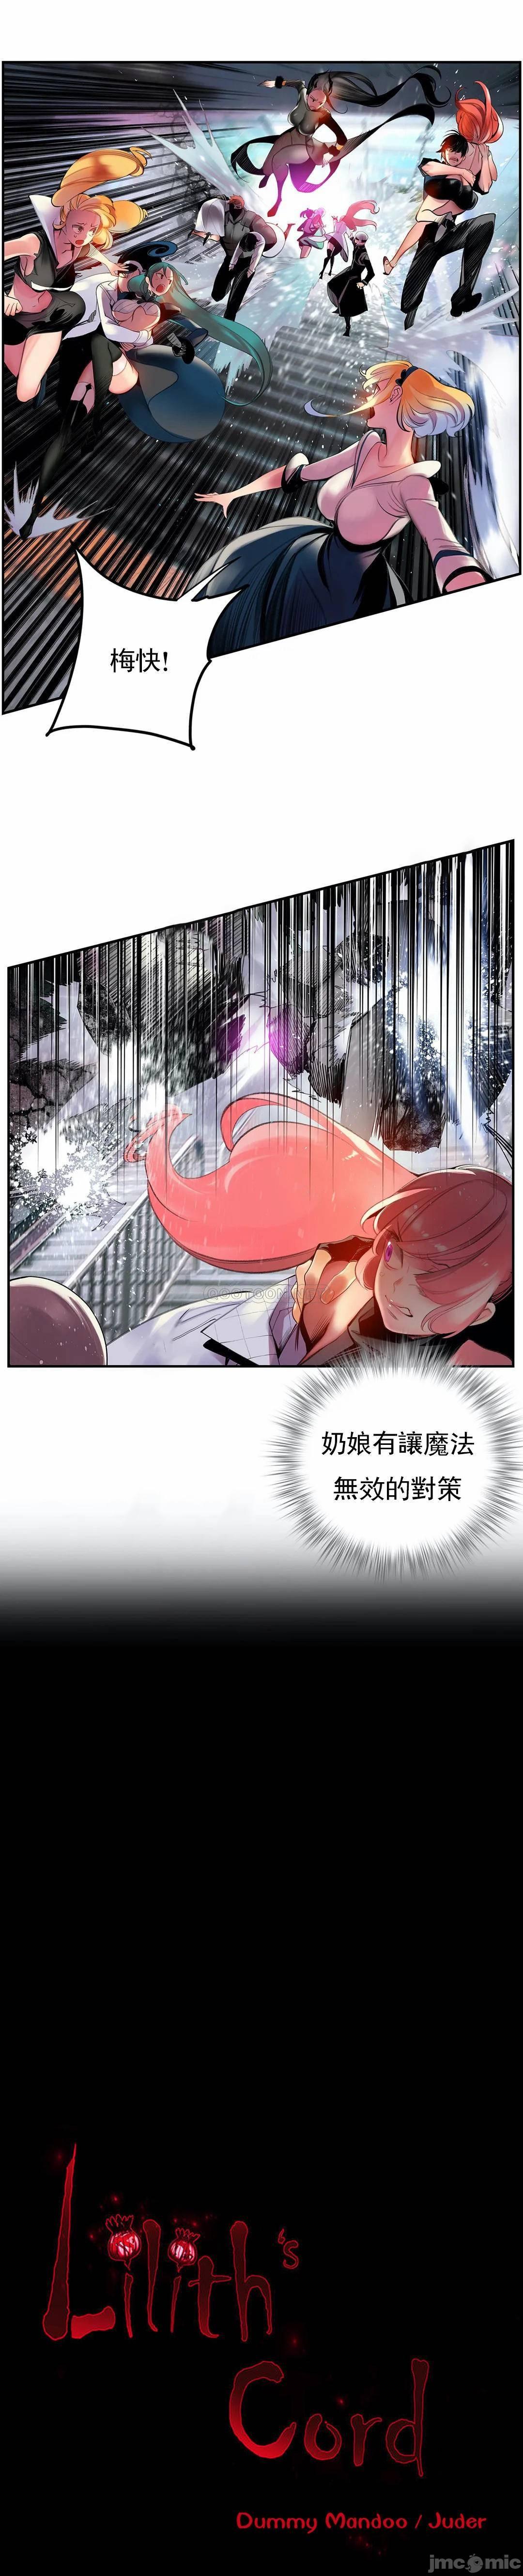 [Juder] Lilith`s Cord (第二季) Ch.77-93 end [Chinese] 366